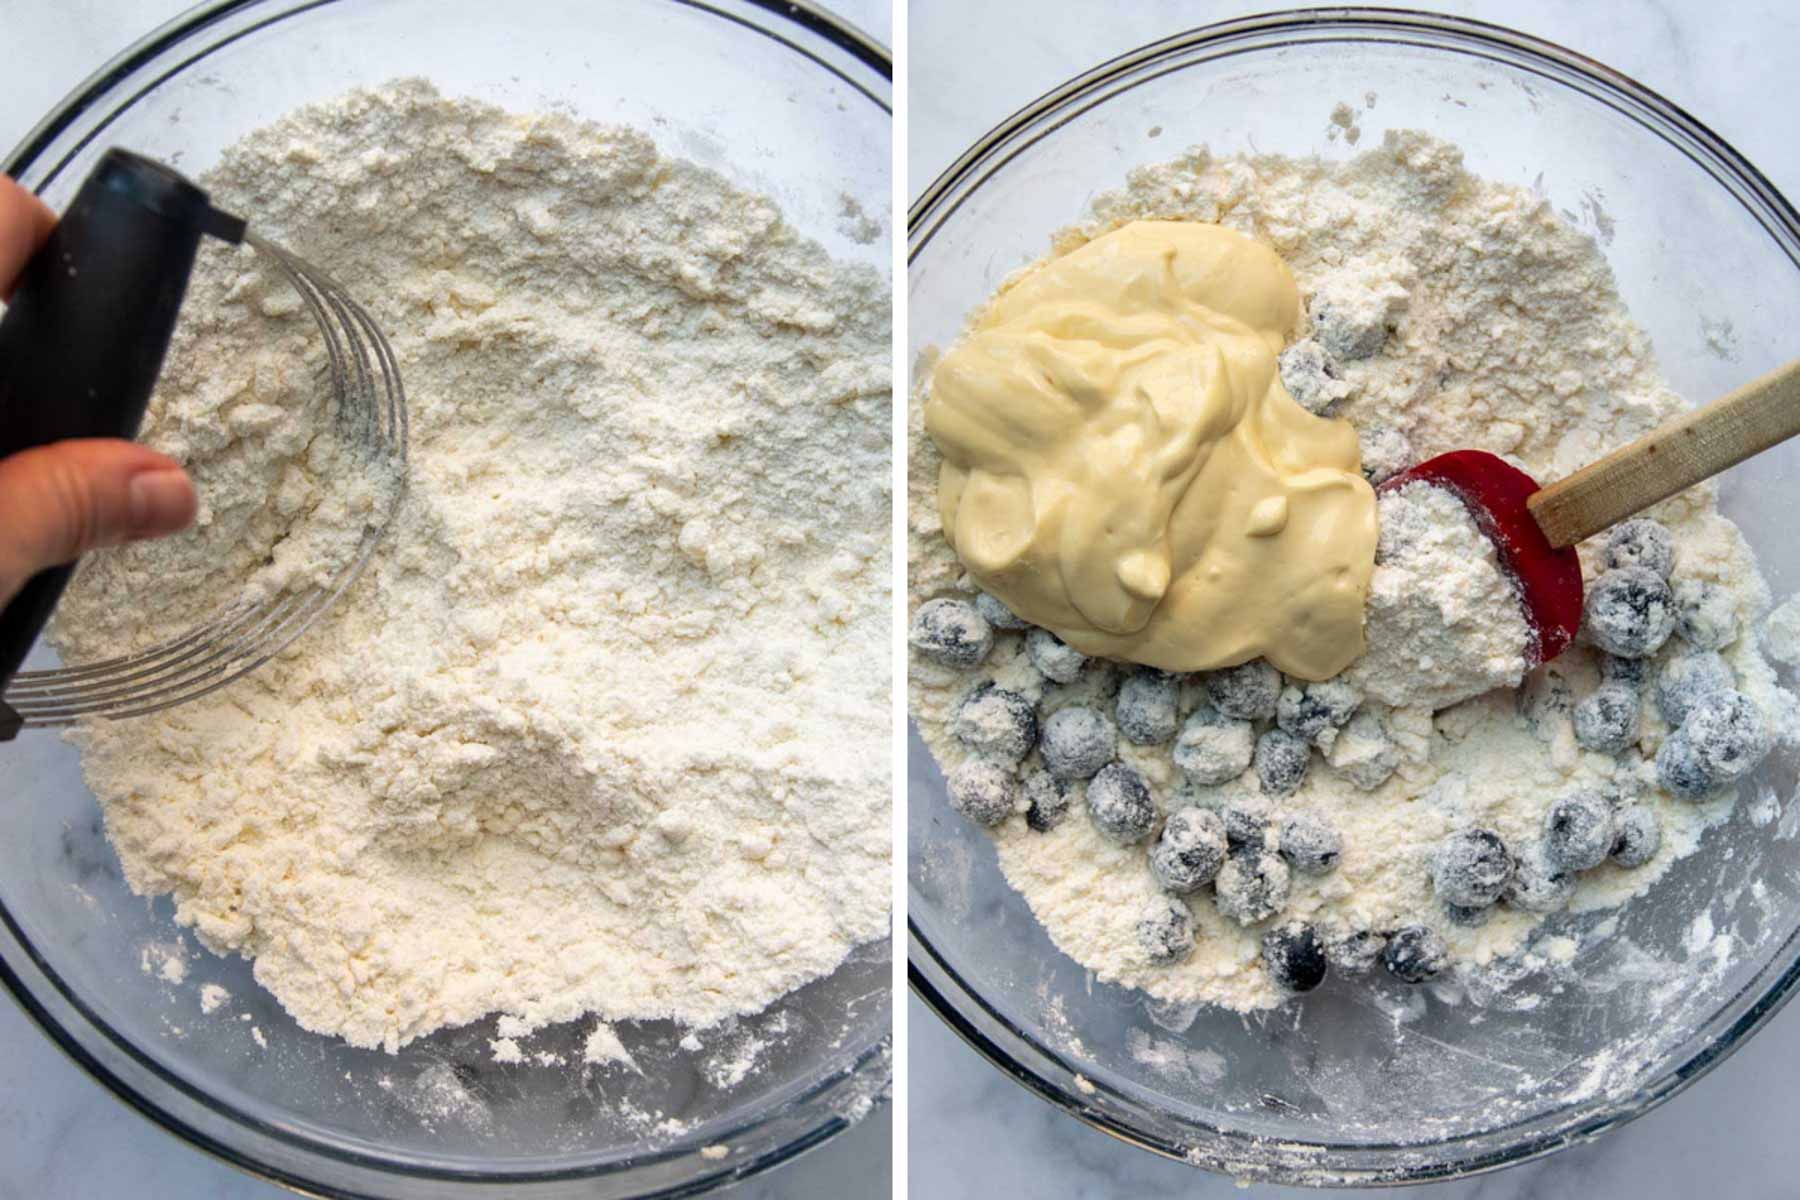 images showing how to make gluten-free scone dough